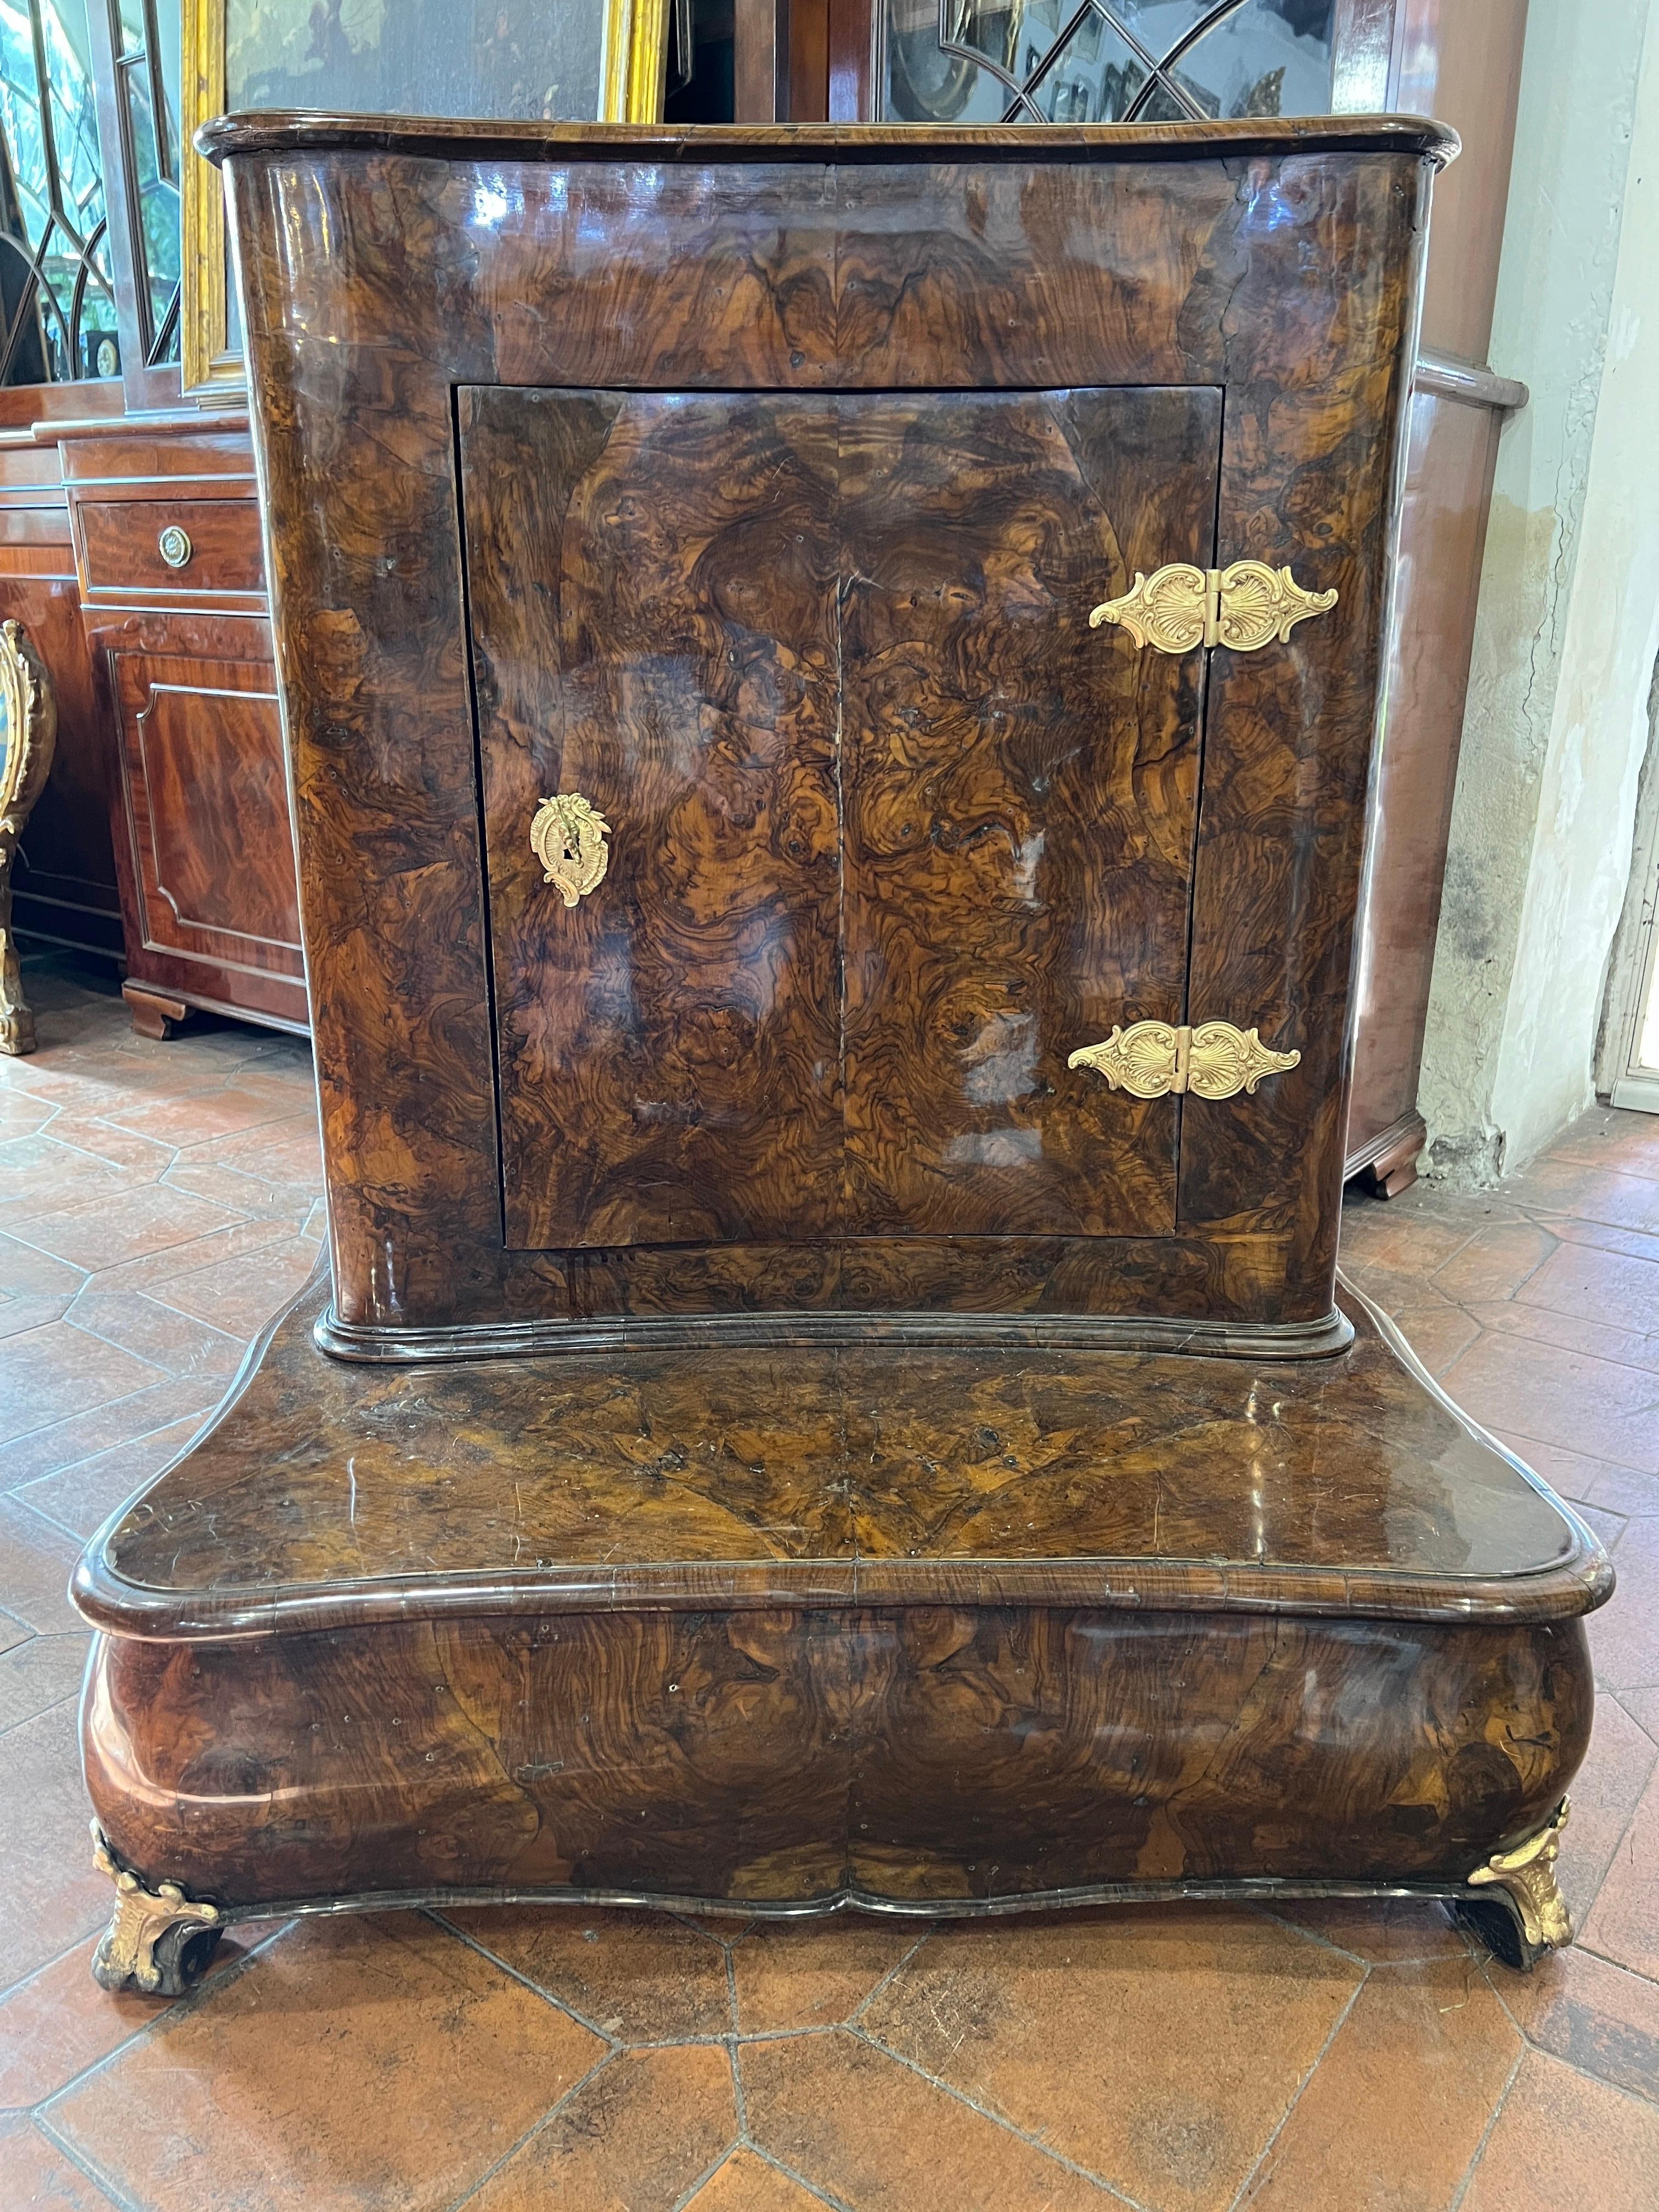 Rare and unobtainable Italian kneeler of Ligurian origin, Baroque period, late 17th early 18th century, veneered in walnut burl and has as many as 4 side drawers , in addition to the central door. Two are lateral at the base and two lateral at the